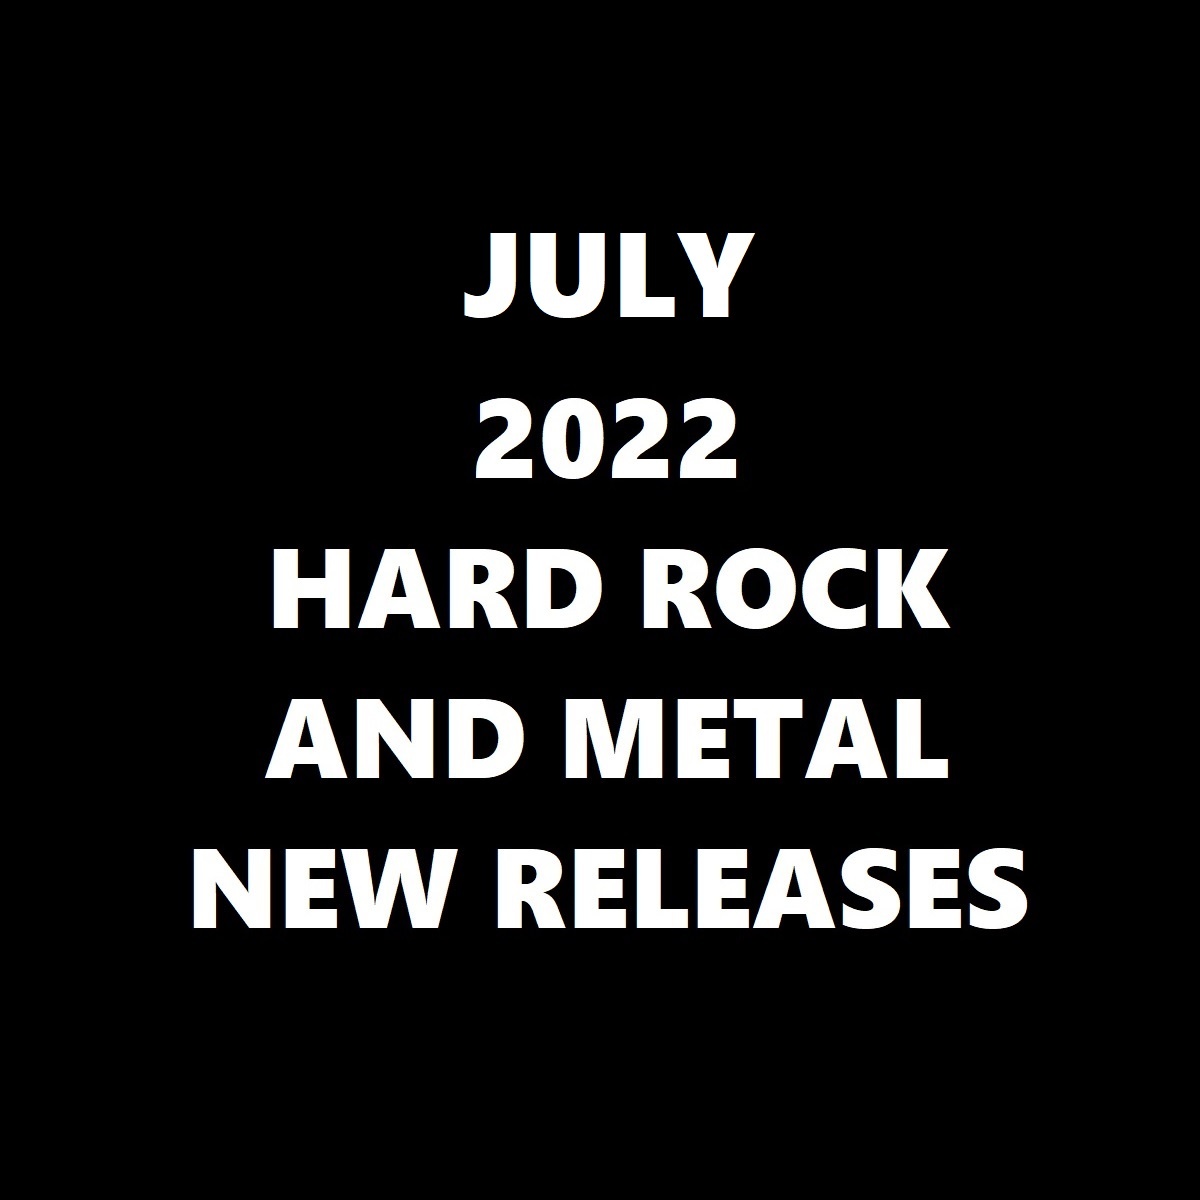 July 2022 Hard Rock And Metal New Releases